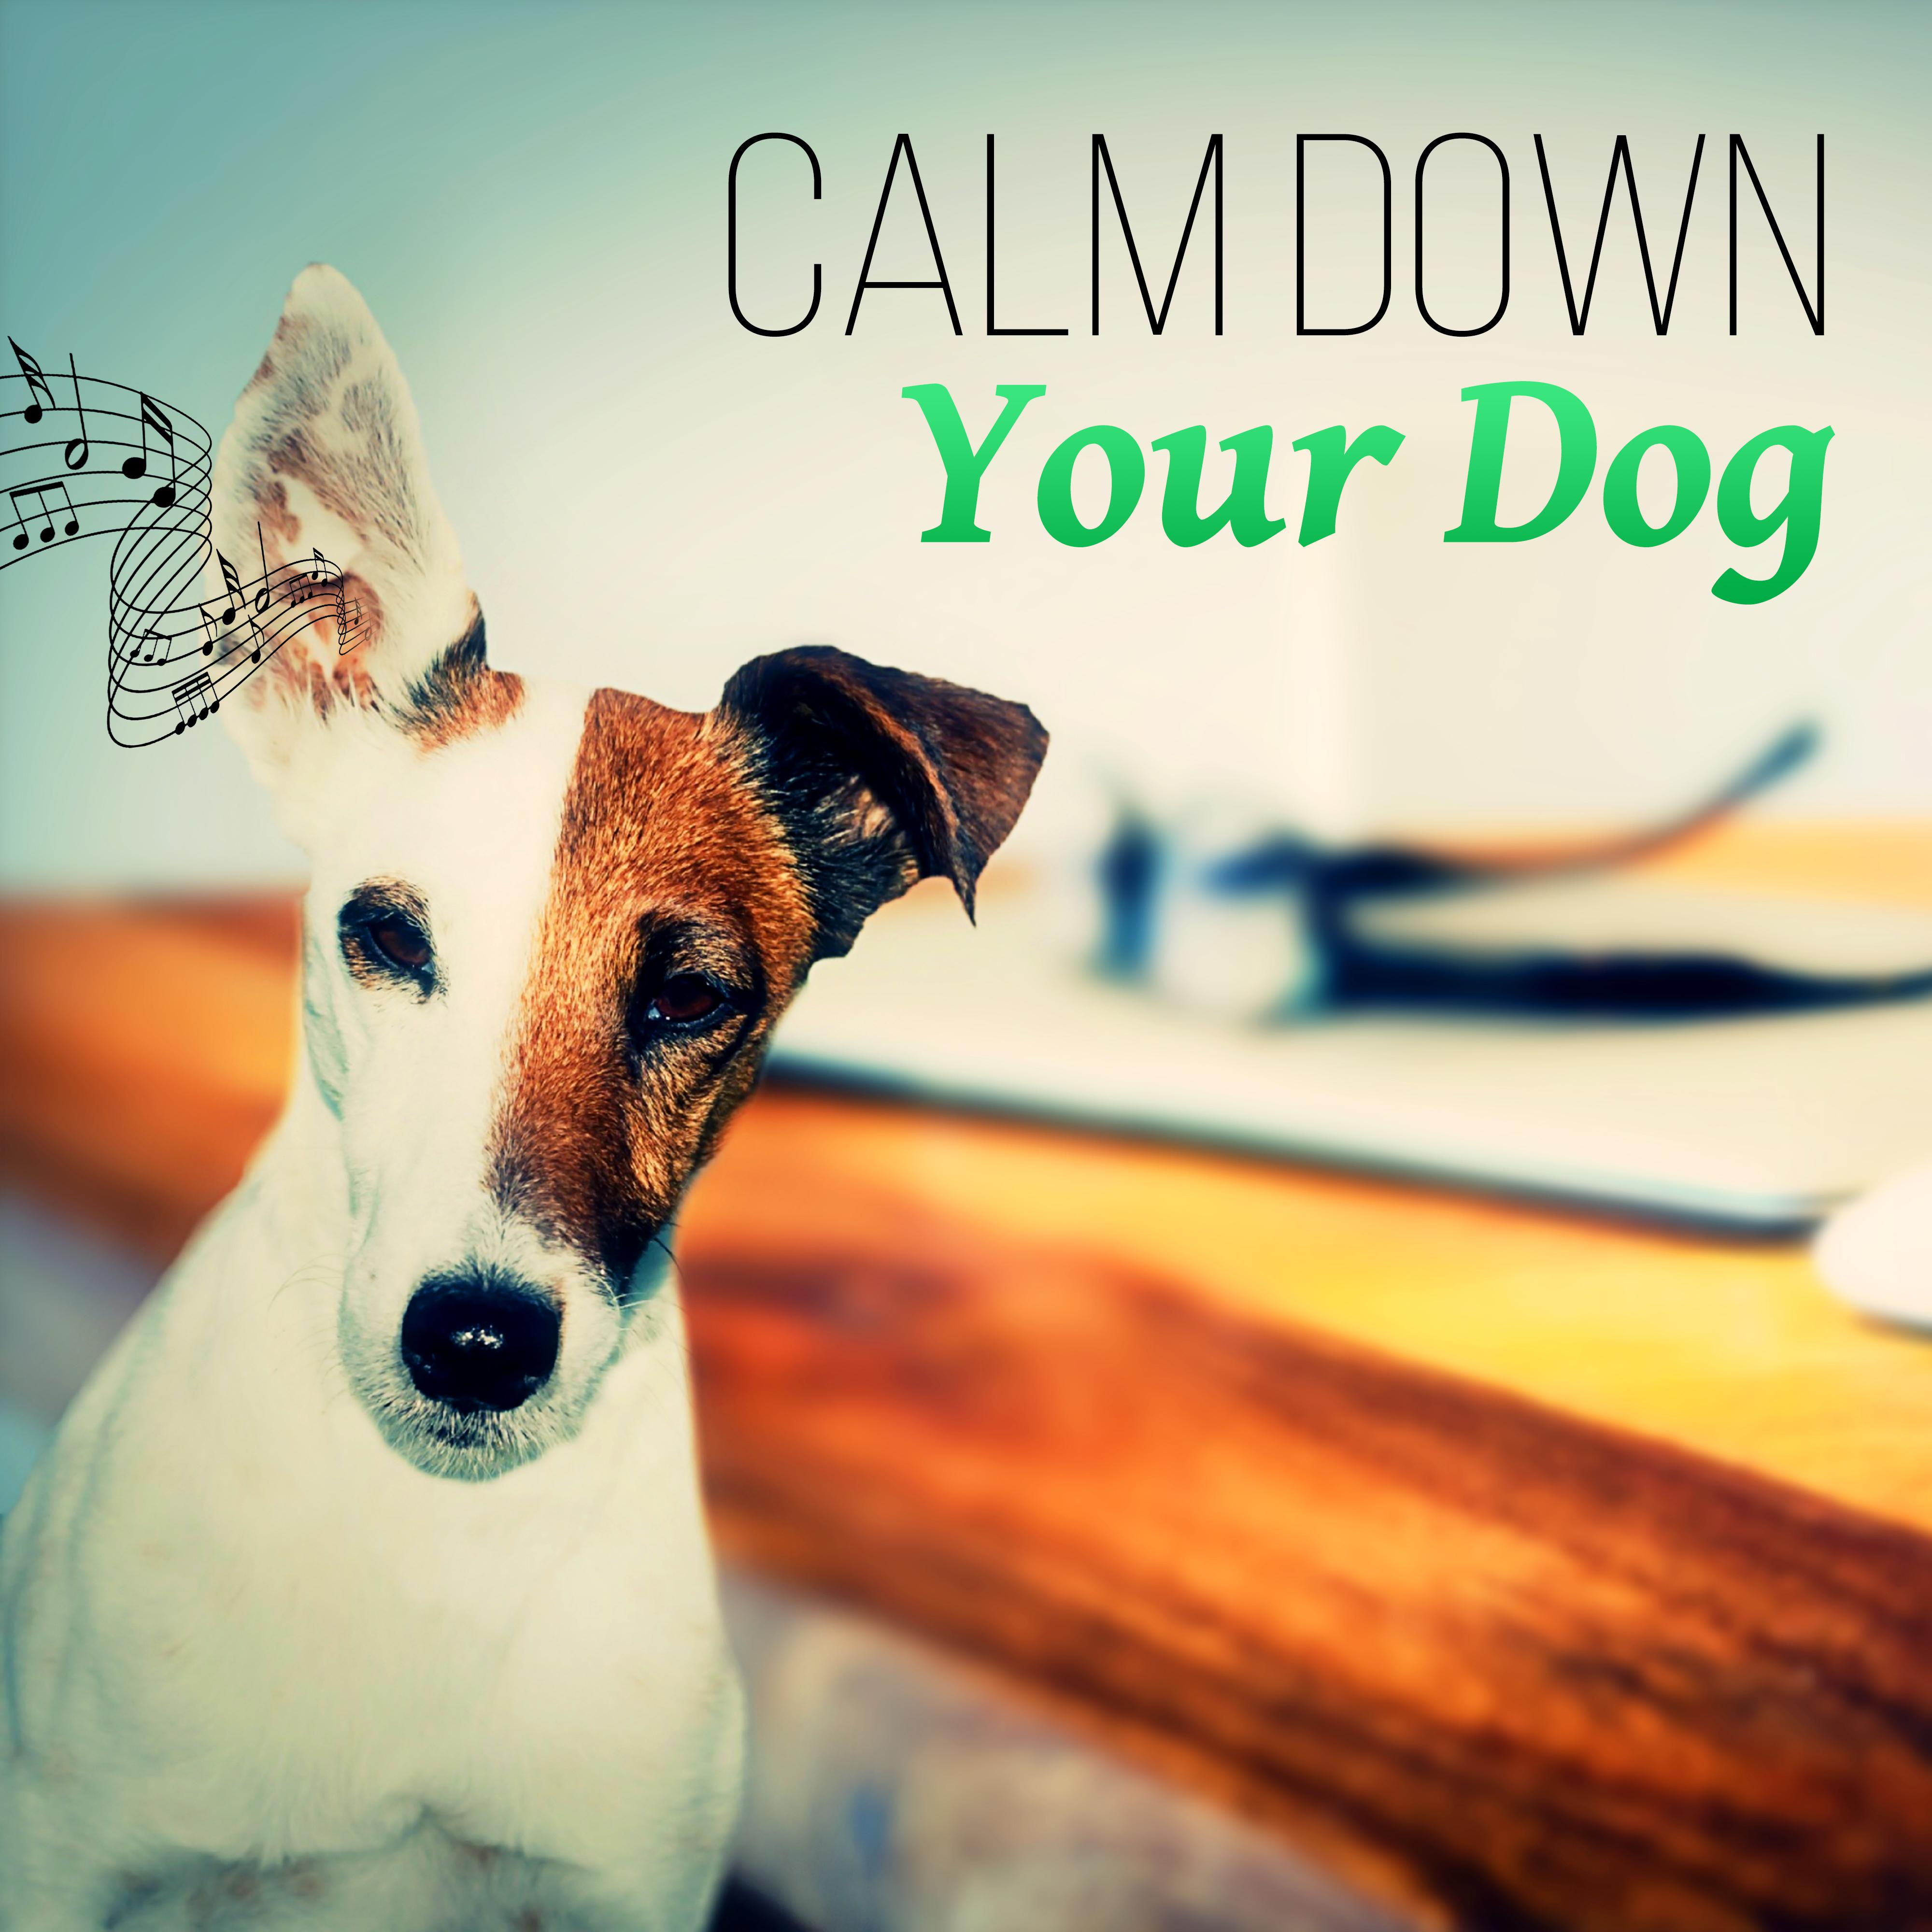 Calm Down Your Dog  Music Therapy for Dogs, Relaxation and Serenity, Destress, Wellness, Peace, Deep Sleep